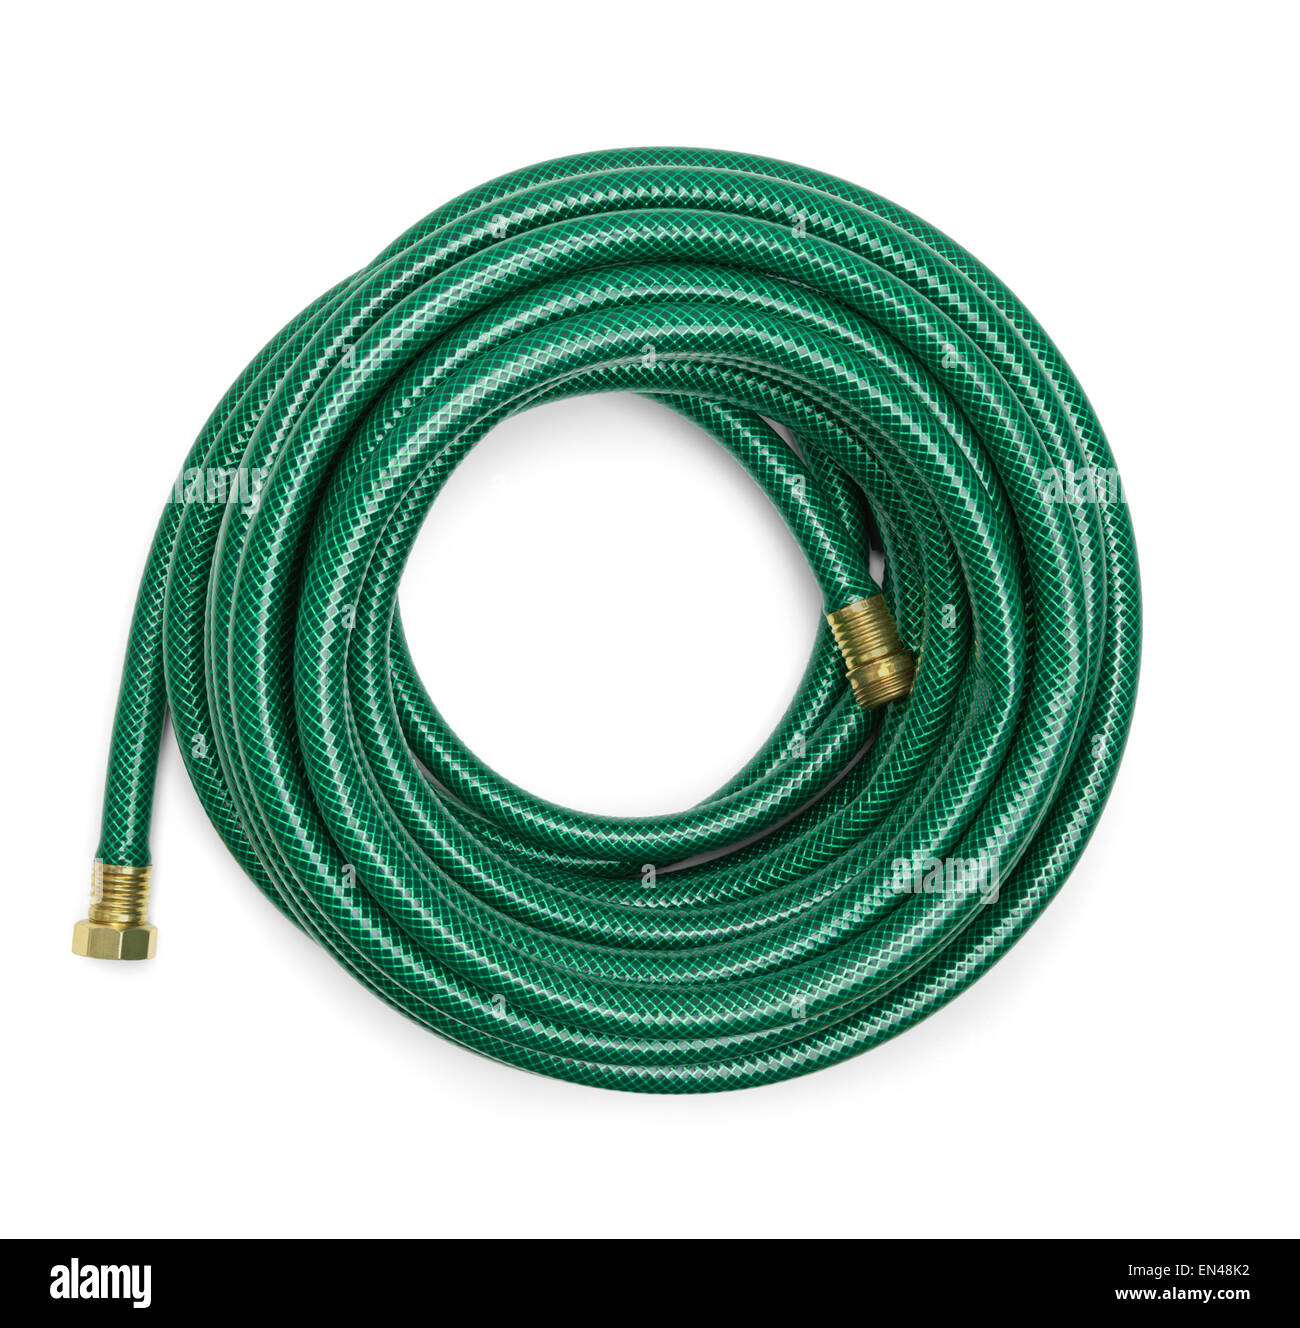 Top View of a Green Garden Hose Isolated on a White Background. Stock Photo